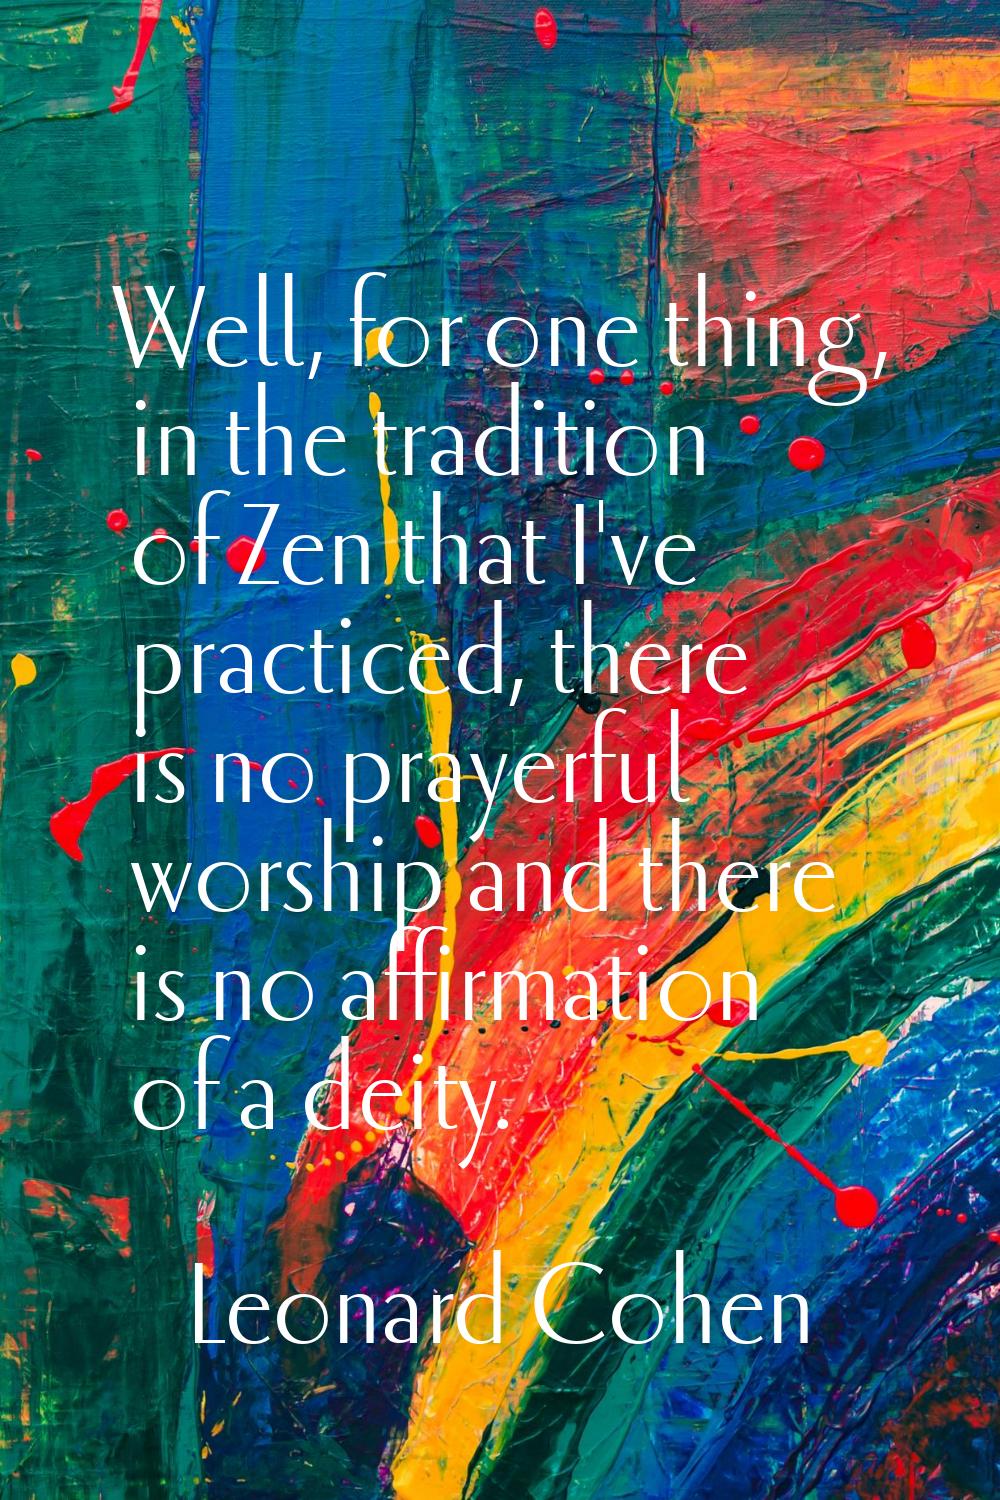 Well, for one thing, in the tradition of Zen that I've practiced, there is no prayerful worship and